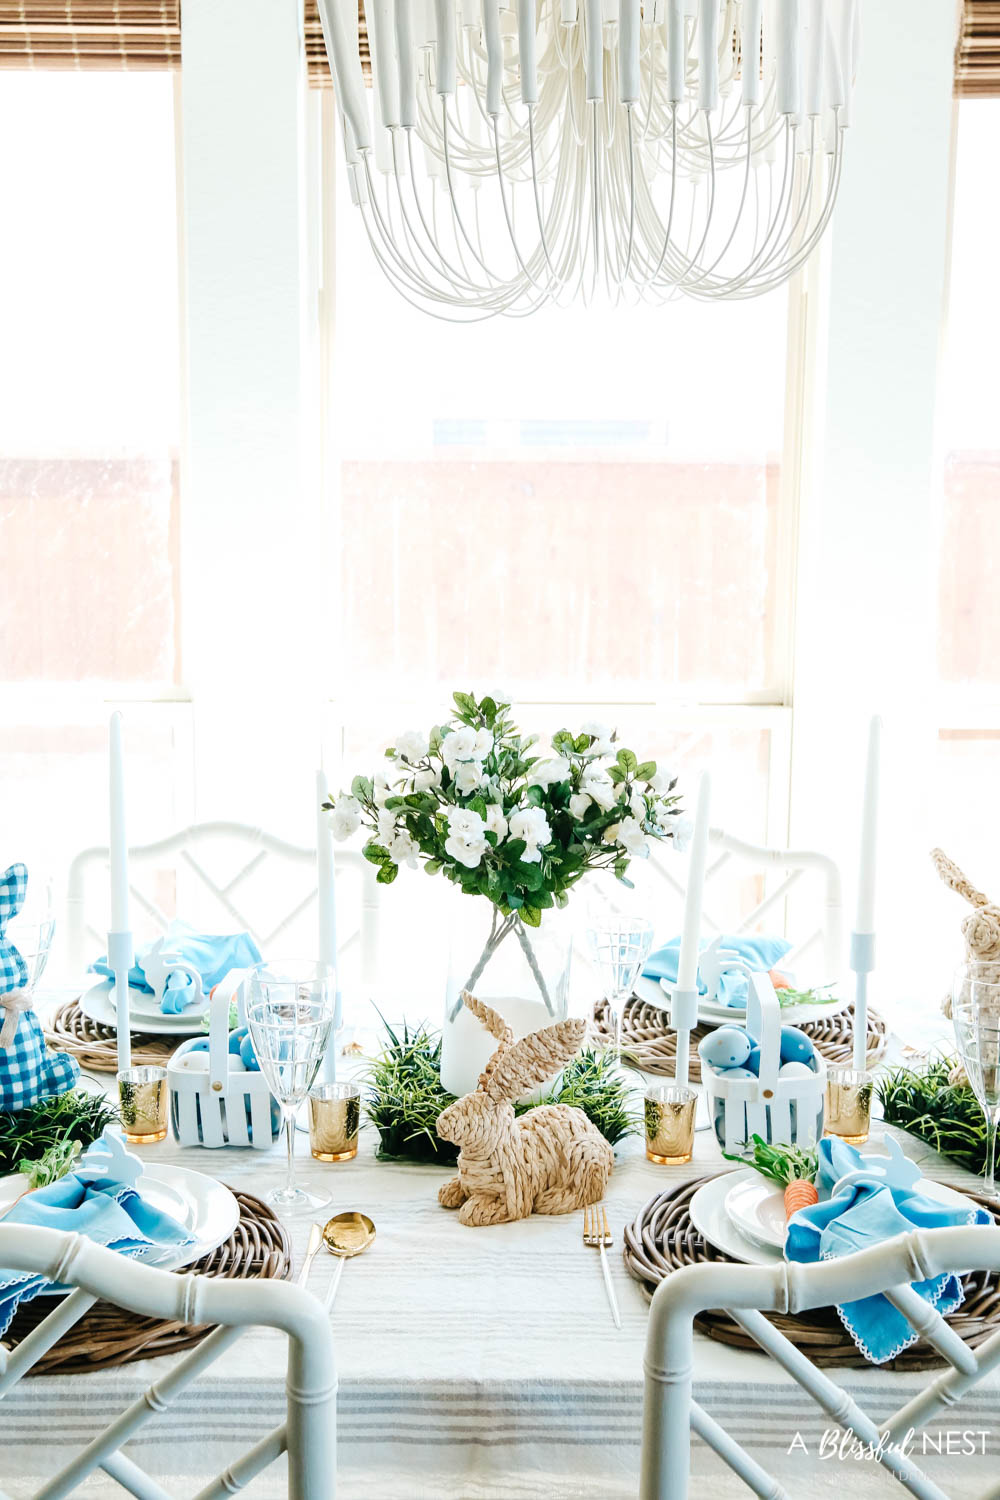 Overview of table setting with white flowers as the centerpiece and basketweave bunnies as accents